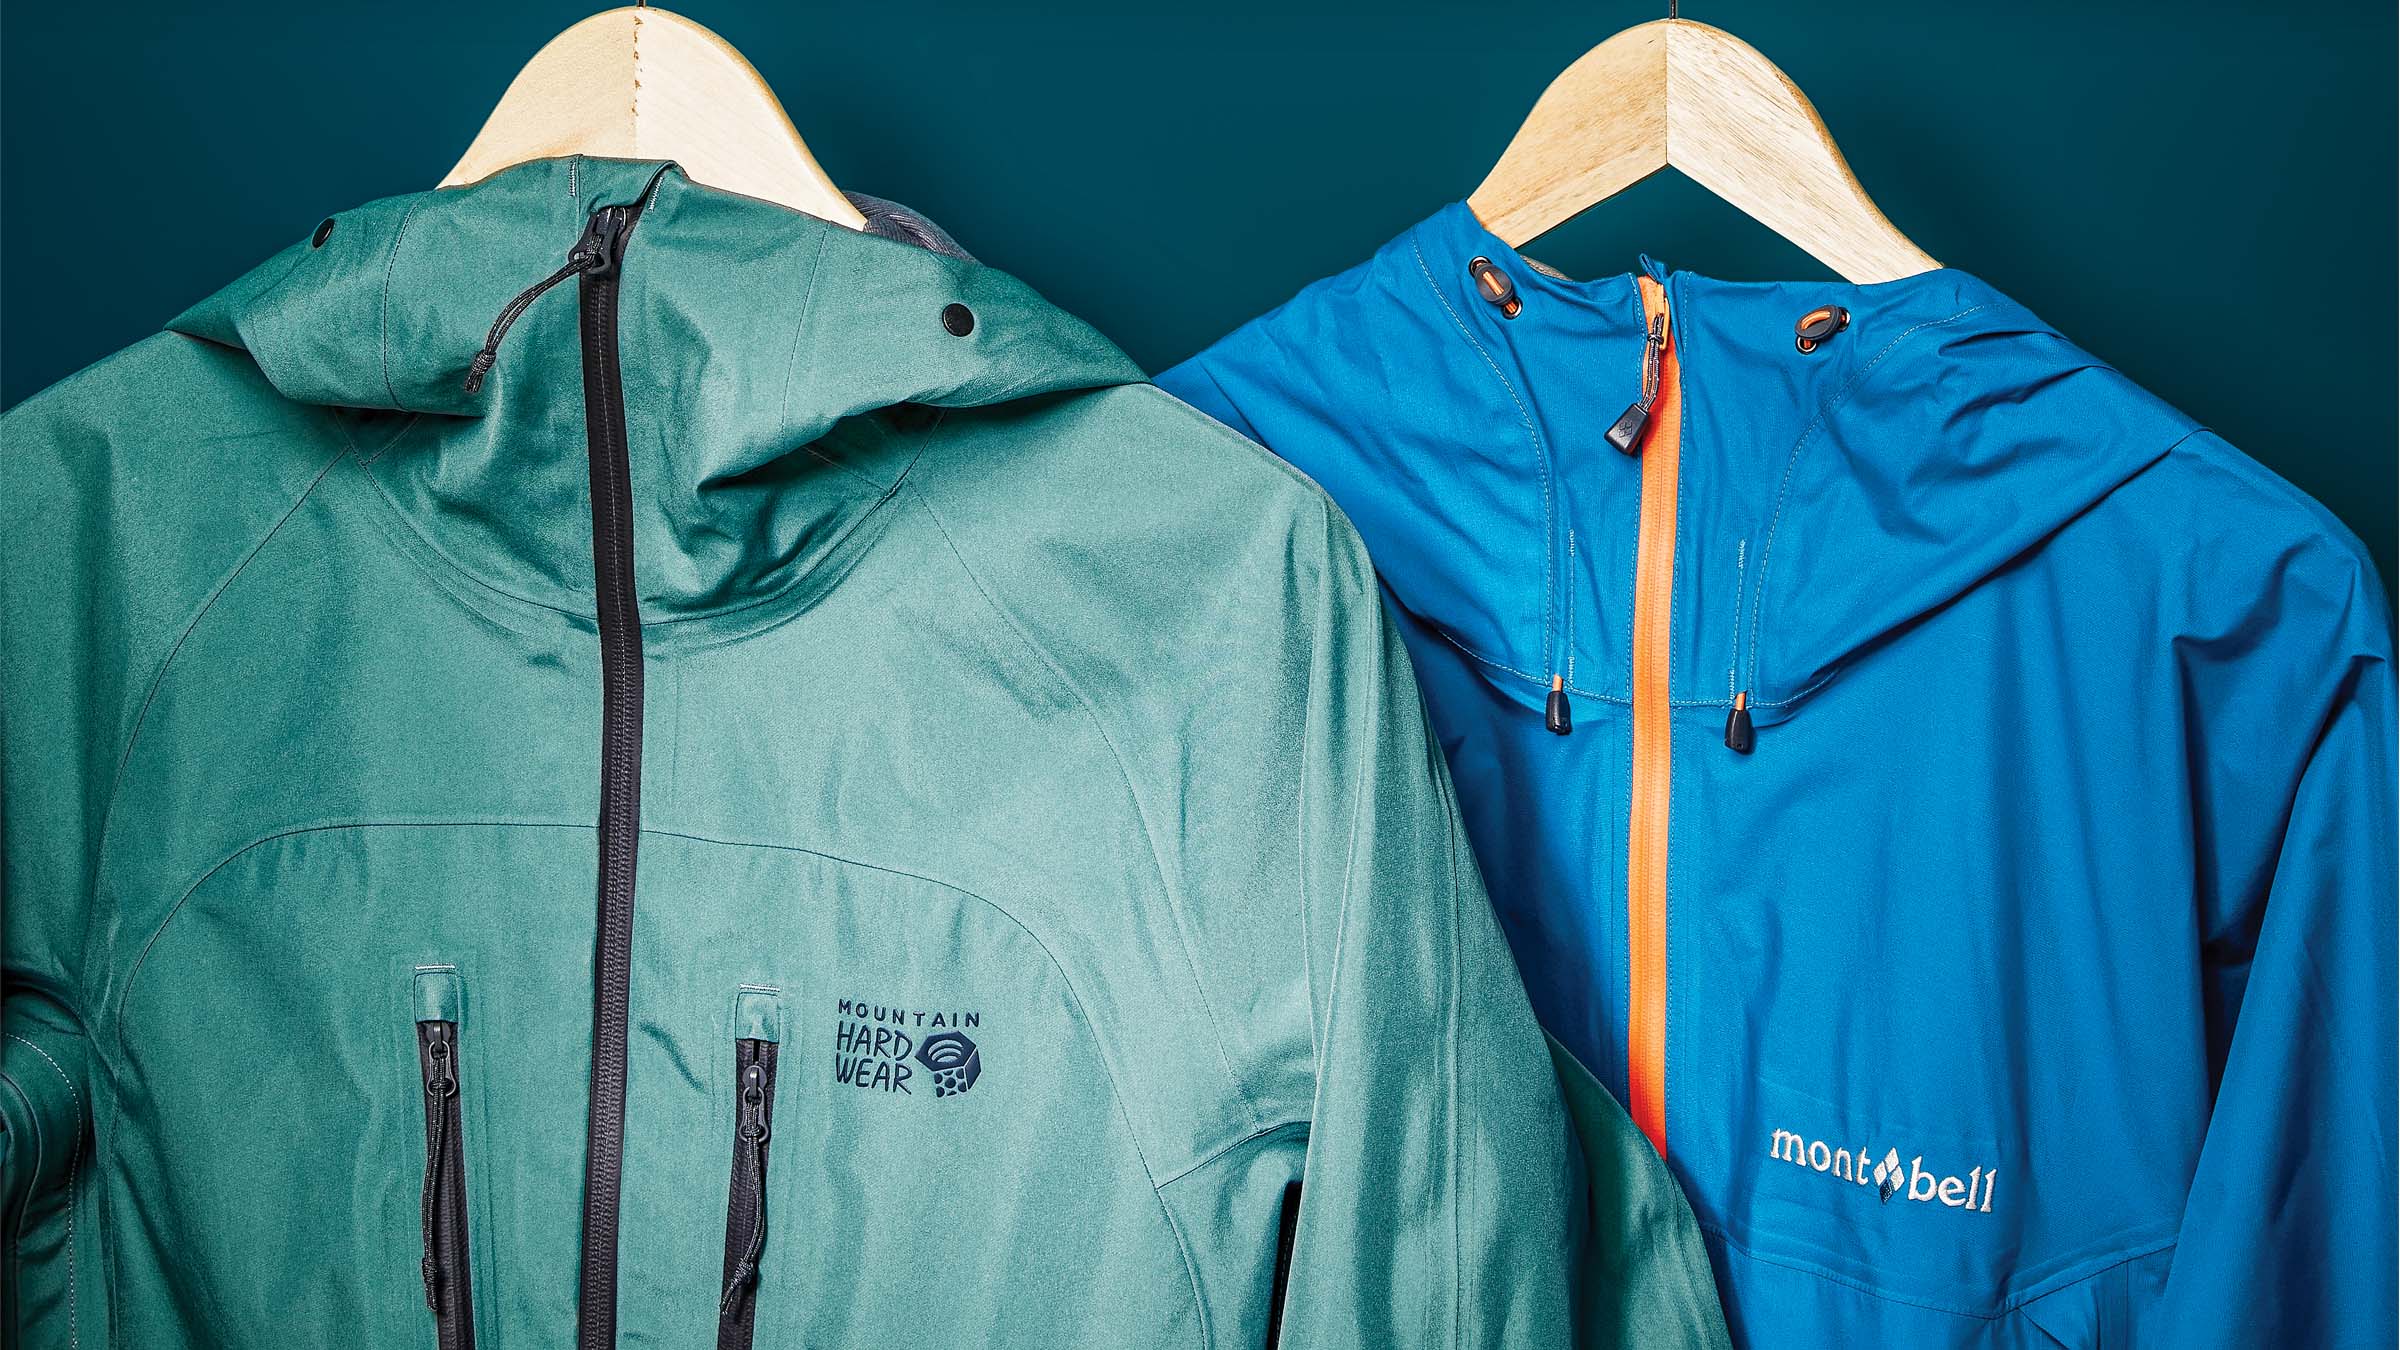 The 10 Best Winter Jackets for Hikers - The Complete Guide - Backpacker